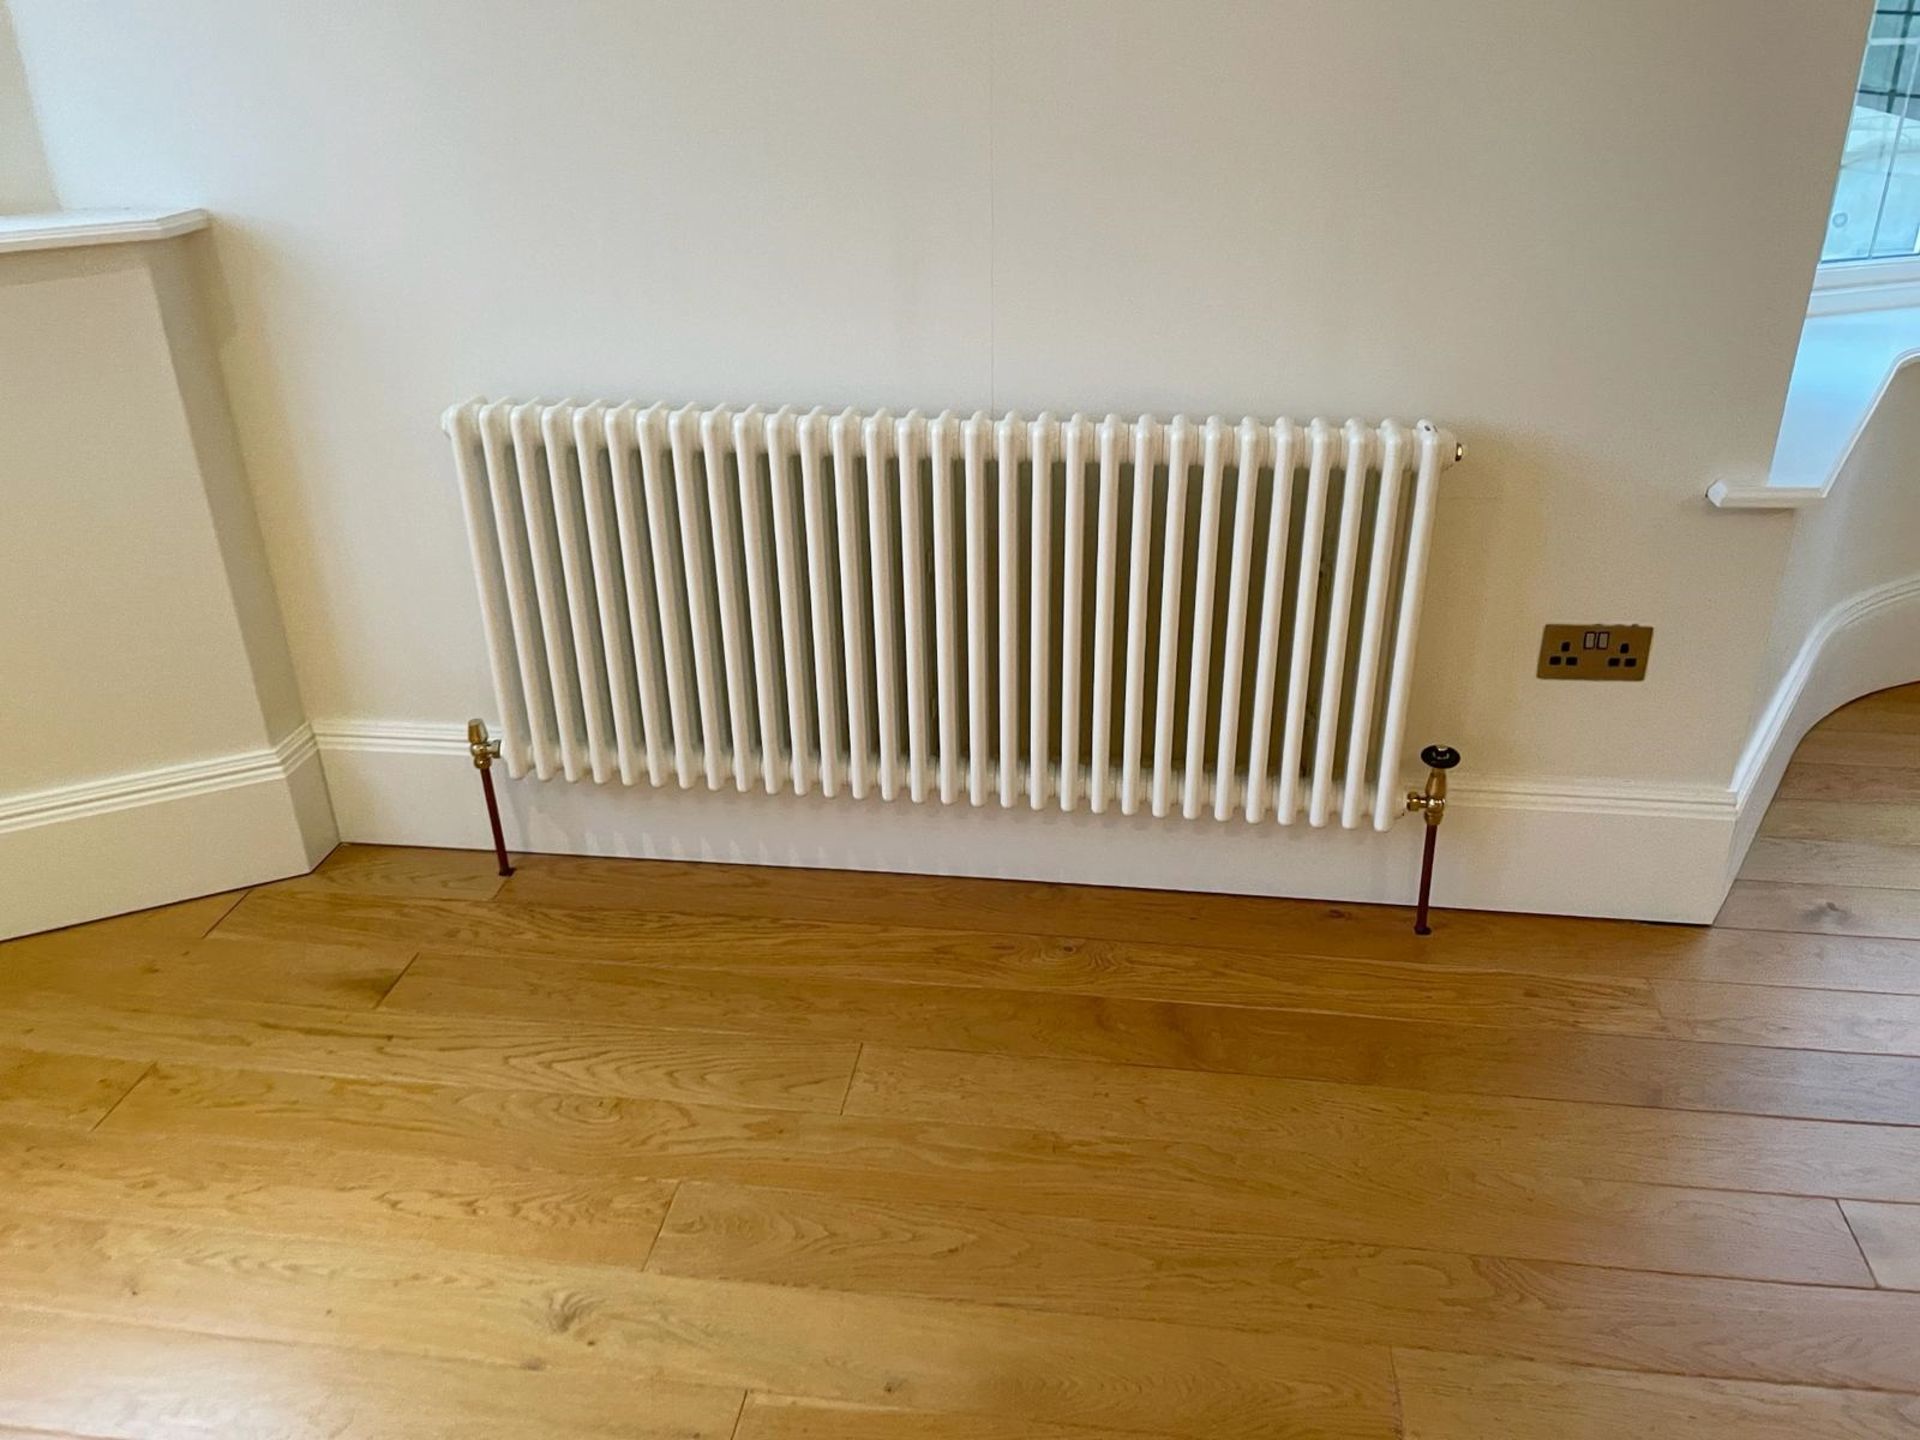 Approximately 17-metres of Timber Painted Skirting Boards in White, Height 23cm - Ref: PAN177 - Bild 7 aus 8